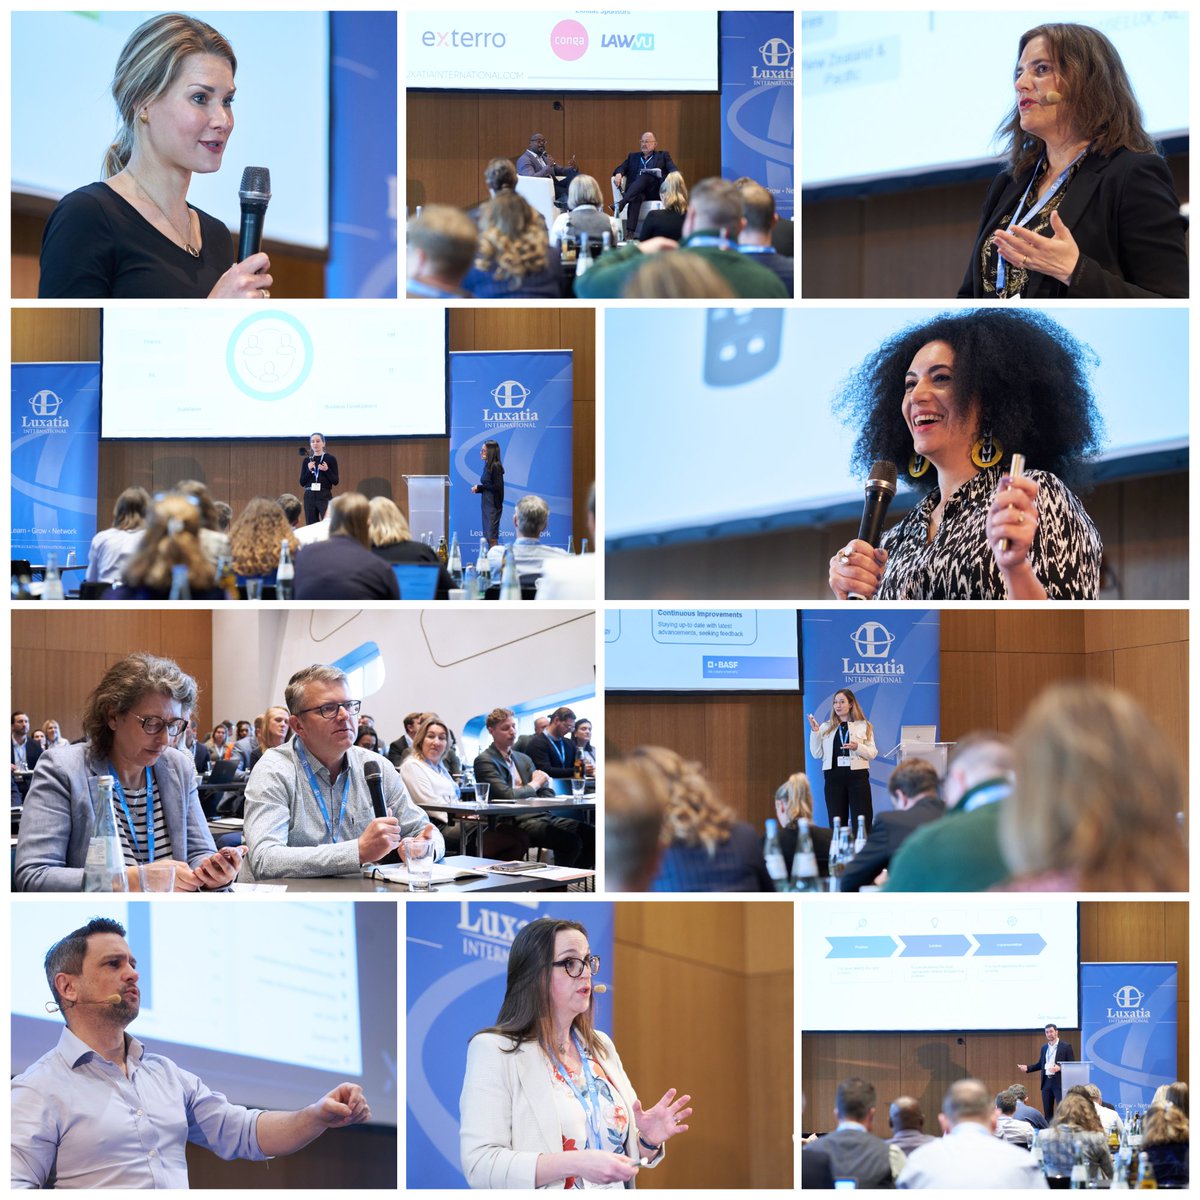 From mastering legal operations to legal design to streamlining processes, Day 2 at the 4th World Legal Operations Summit was filled with incredible insights. Kudos to @Exterro, @CocaColaEP, @DWF_Law, @Bayer, @farfetch, @NLawGlobal, @merckgroup & @Clifford_Chance. #LegalOps2024